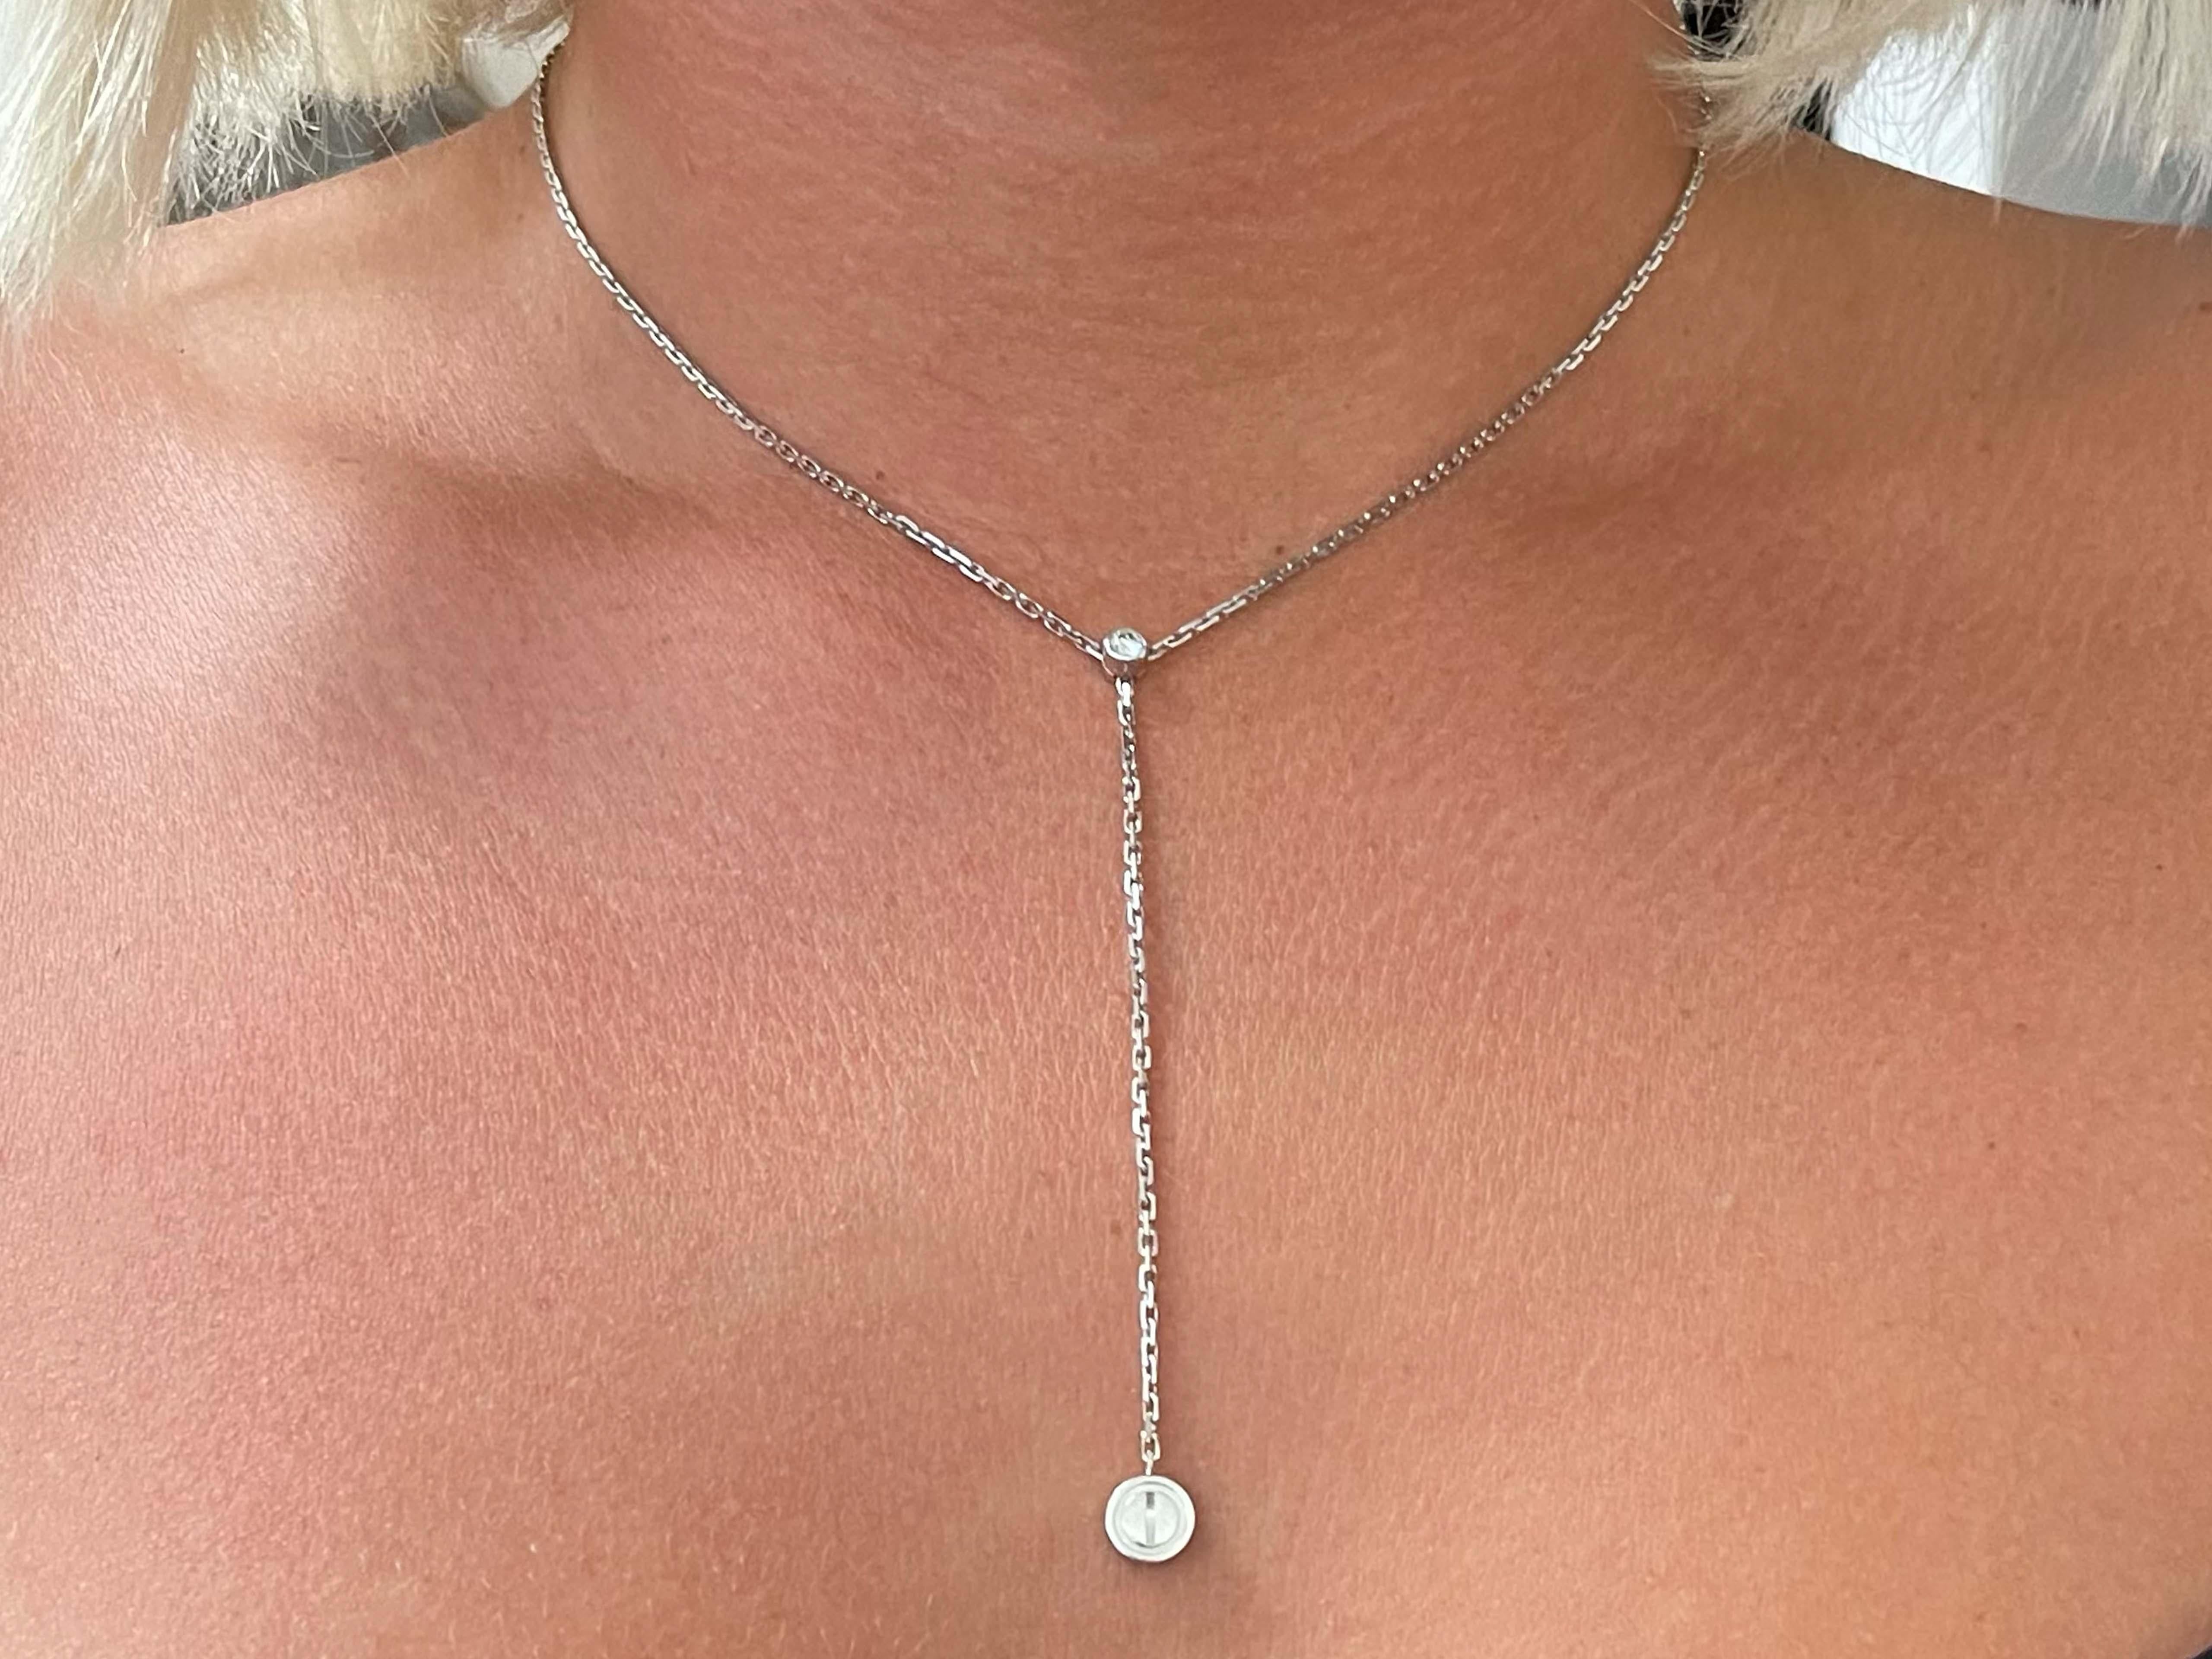 This Cartier Santos Love Diamond Drop Necklace in 18k White Gold features a round brilliant cut diamond D-F in color, VS in clarity weighing approx. 0.20 carats. The necklace is in 18k white gold and comes on a 14